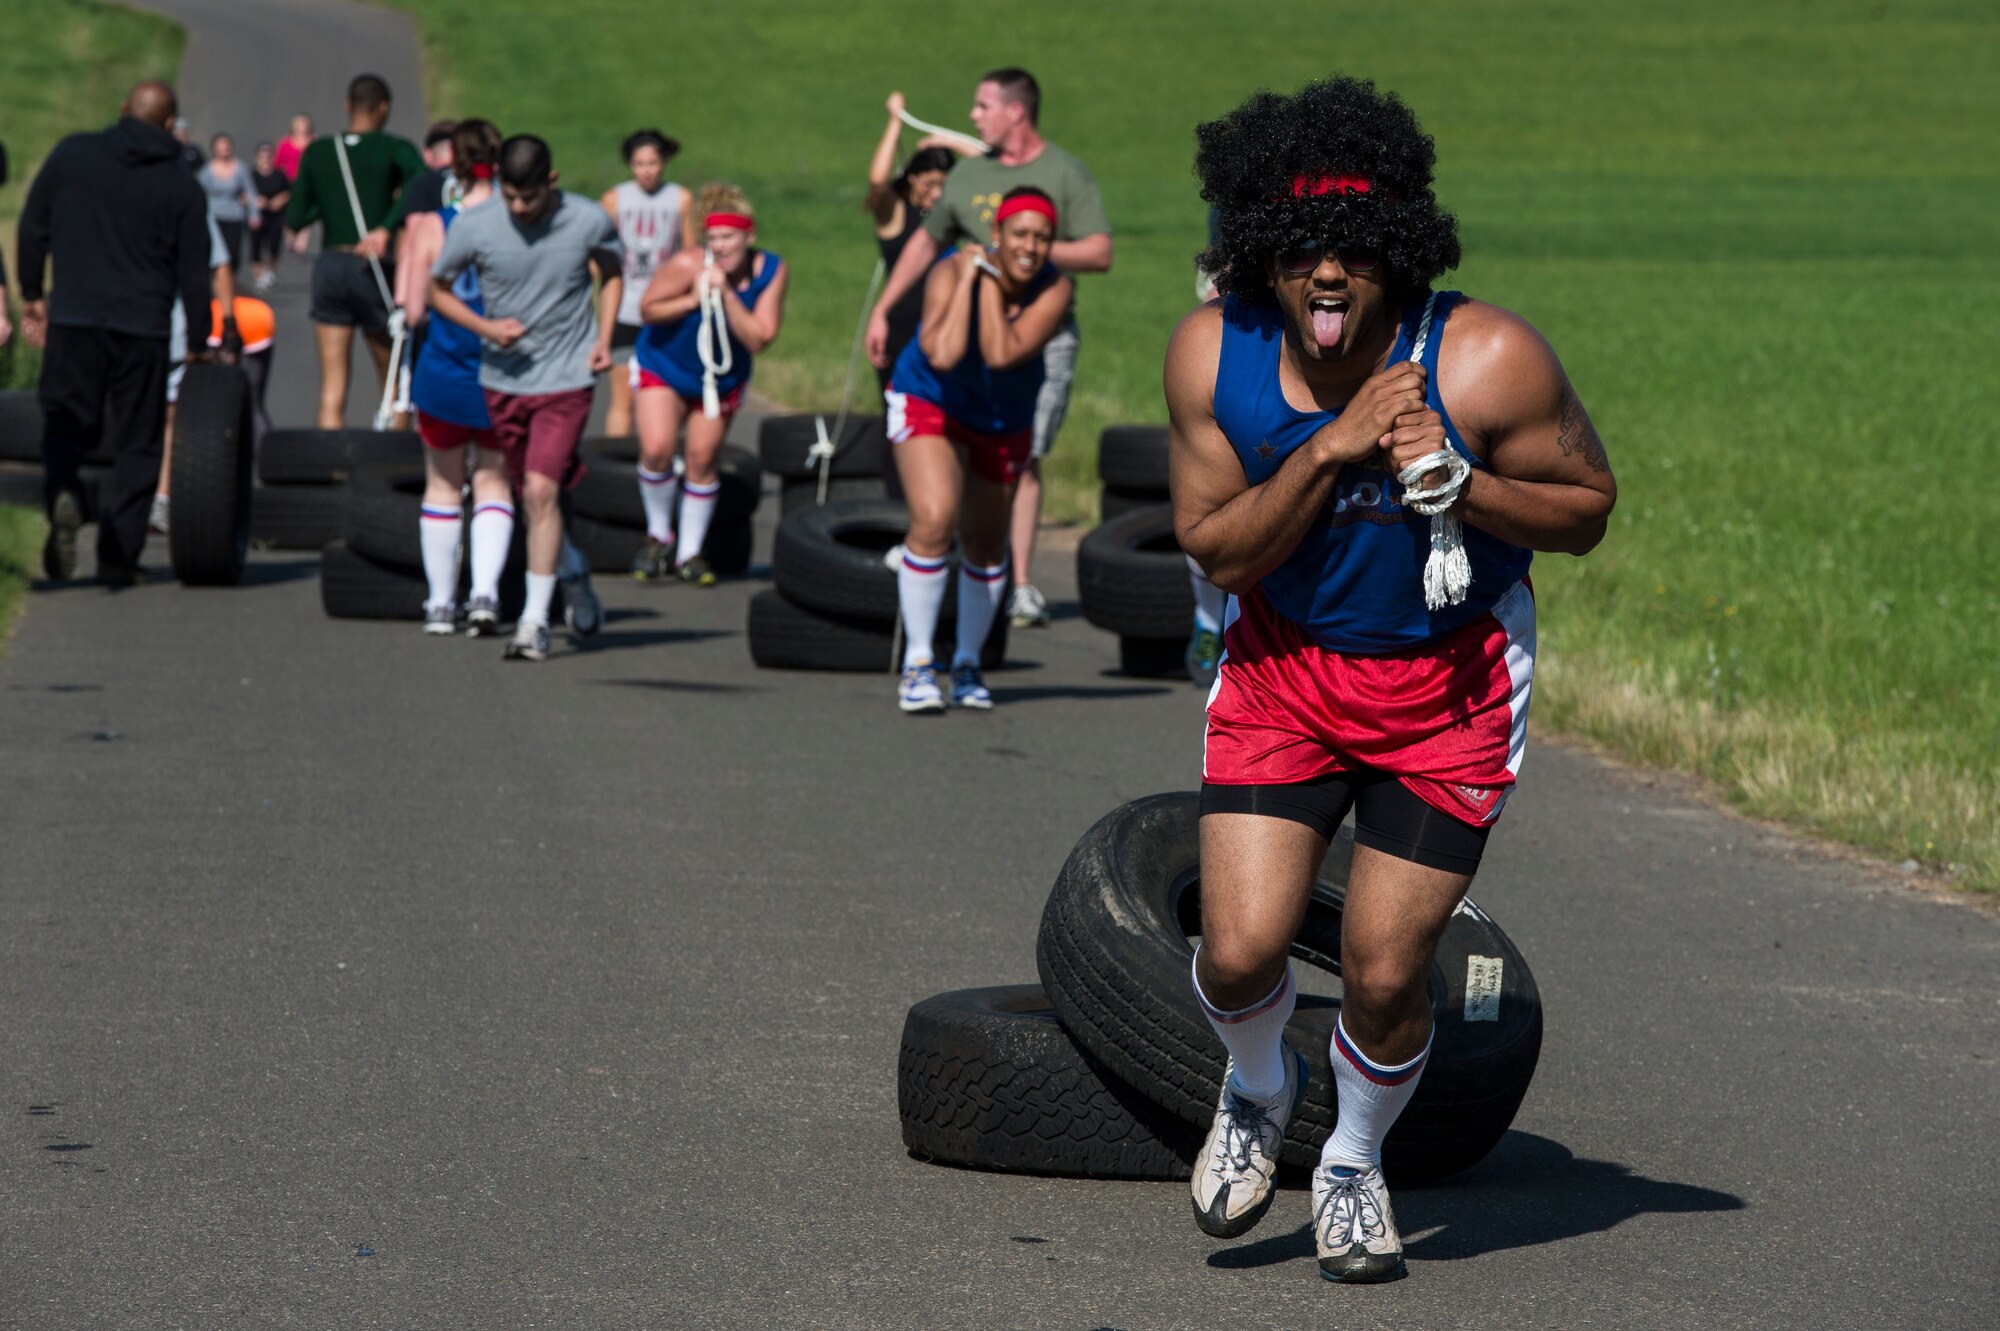 Mud run team members participate in a tire drag during the second annual Tier II 5K Mud Run Aug. 20, 2014, at Spangdahlem Air Base, Germany. Members were encouraged to form teams with each having unique themes and names. (U.S. Air Force photo by Staff Sgt. Christopher Ruano/Released)